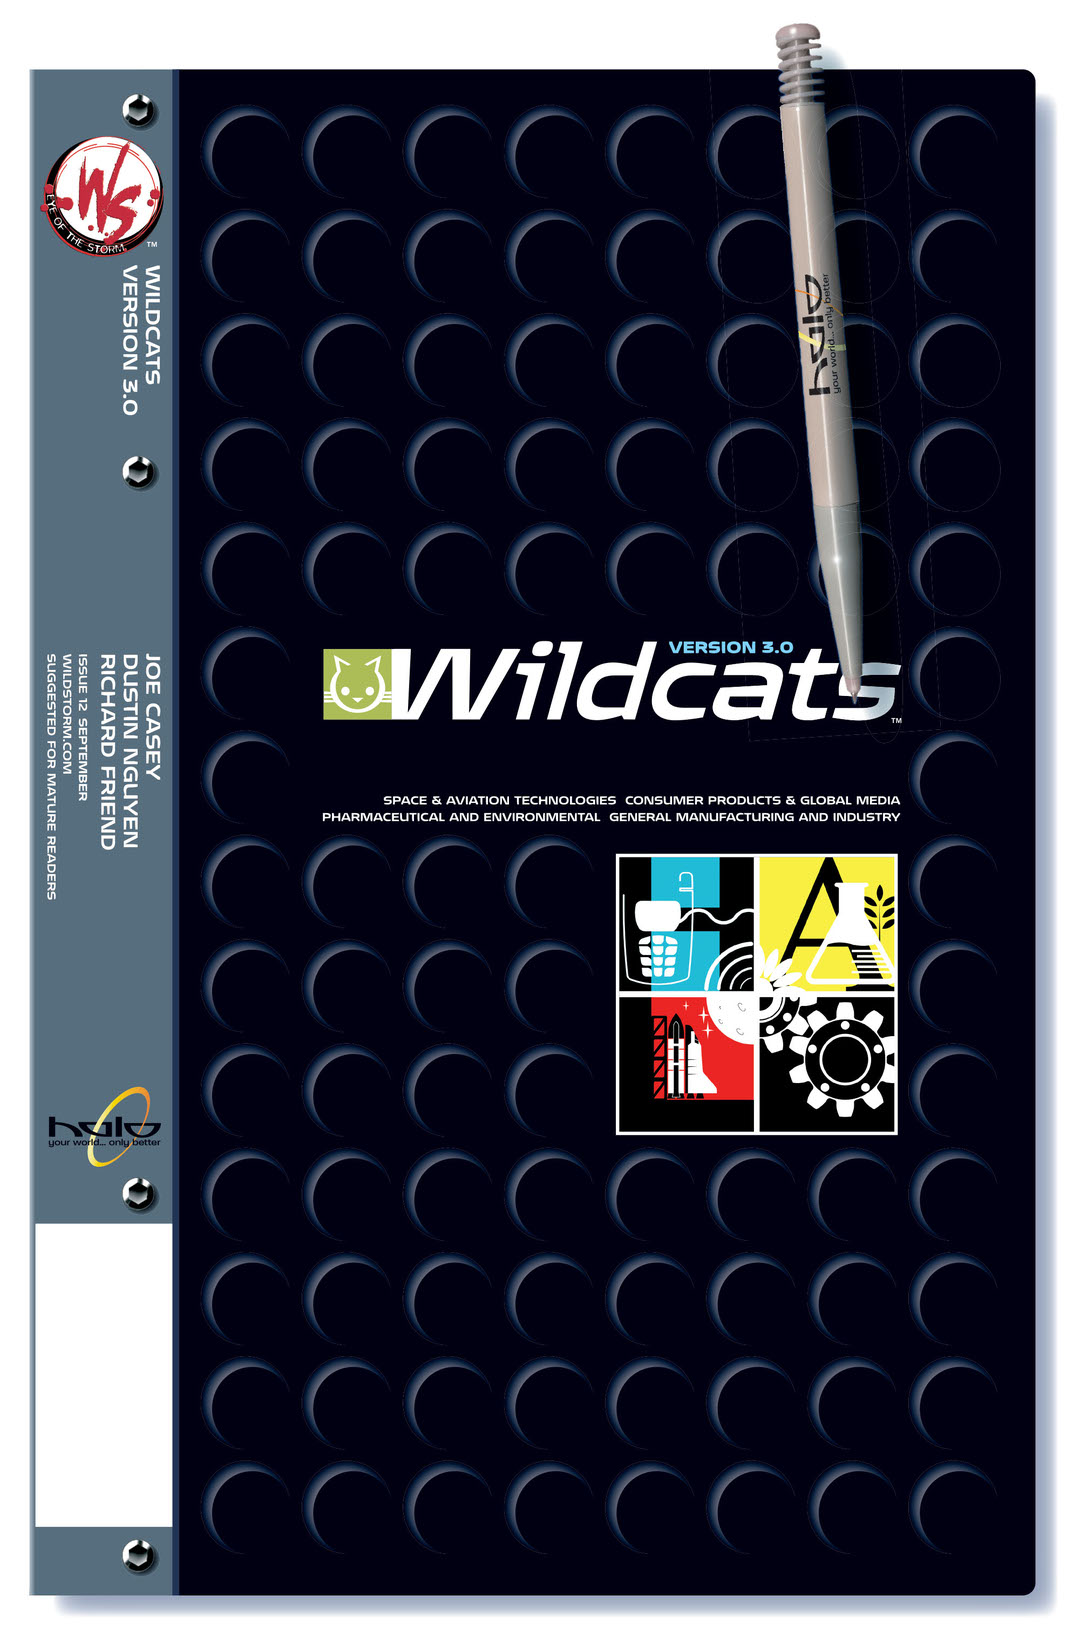 Wildcats Version 3.0 #12 preview images